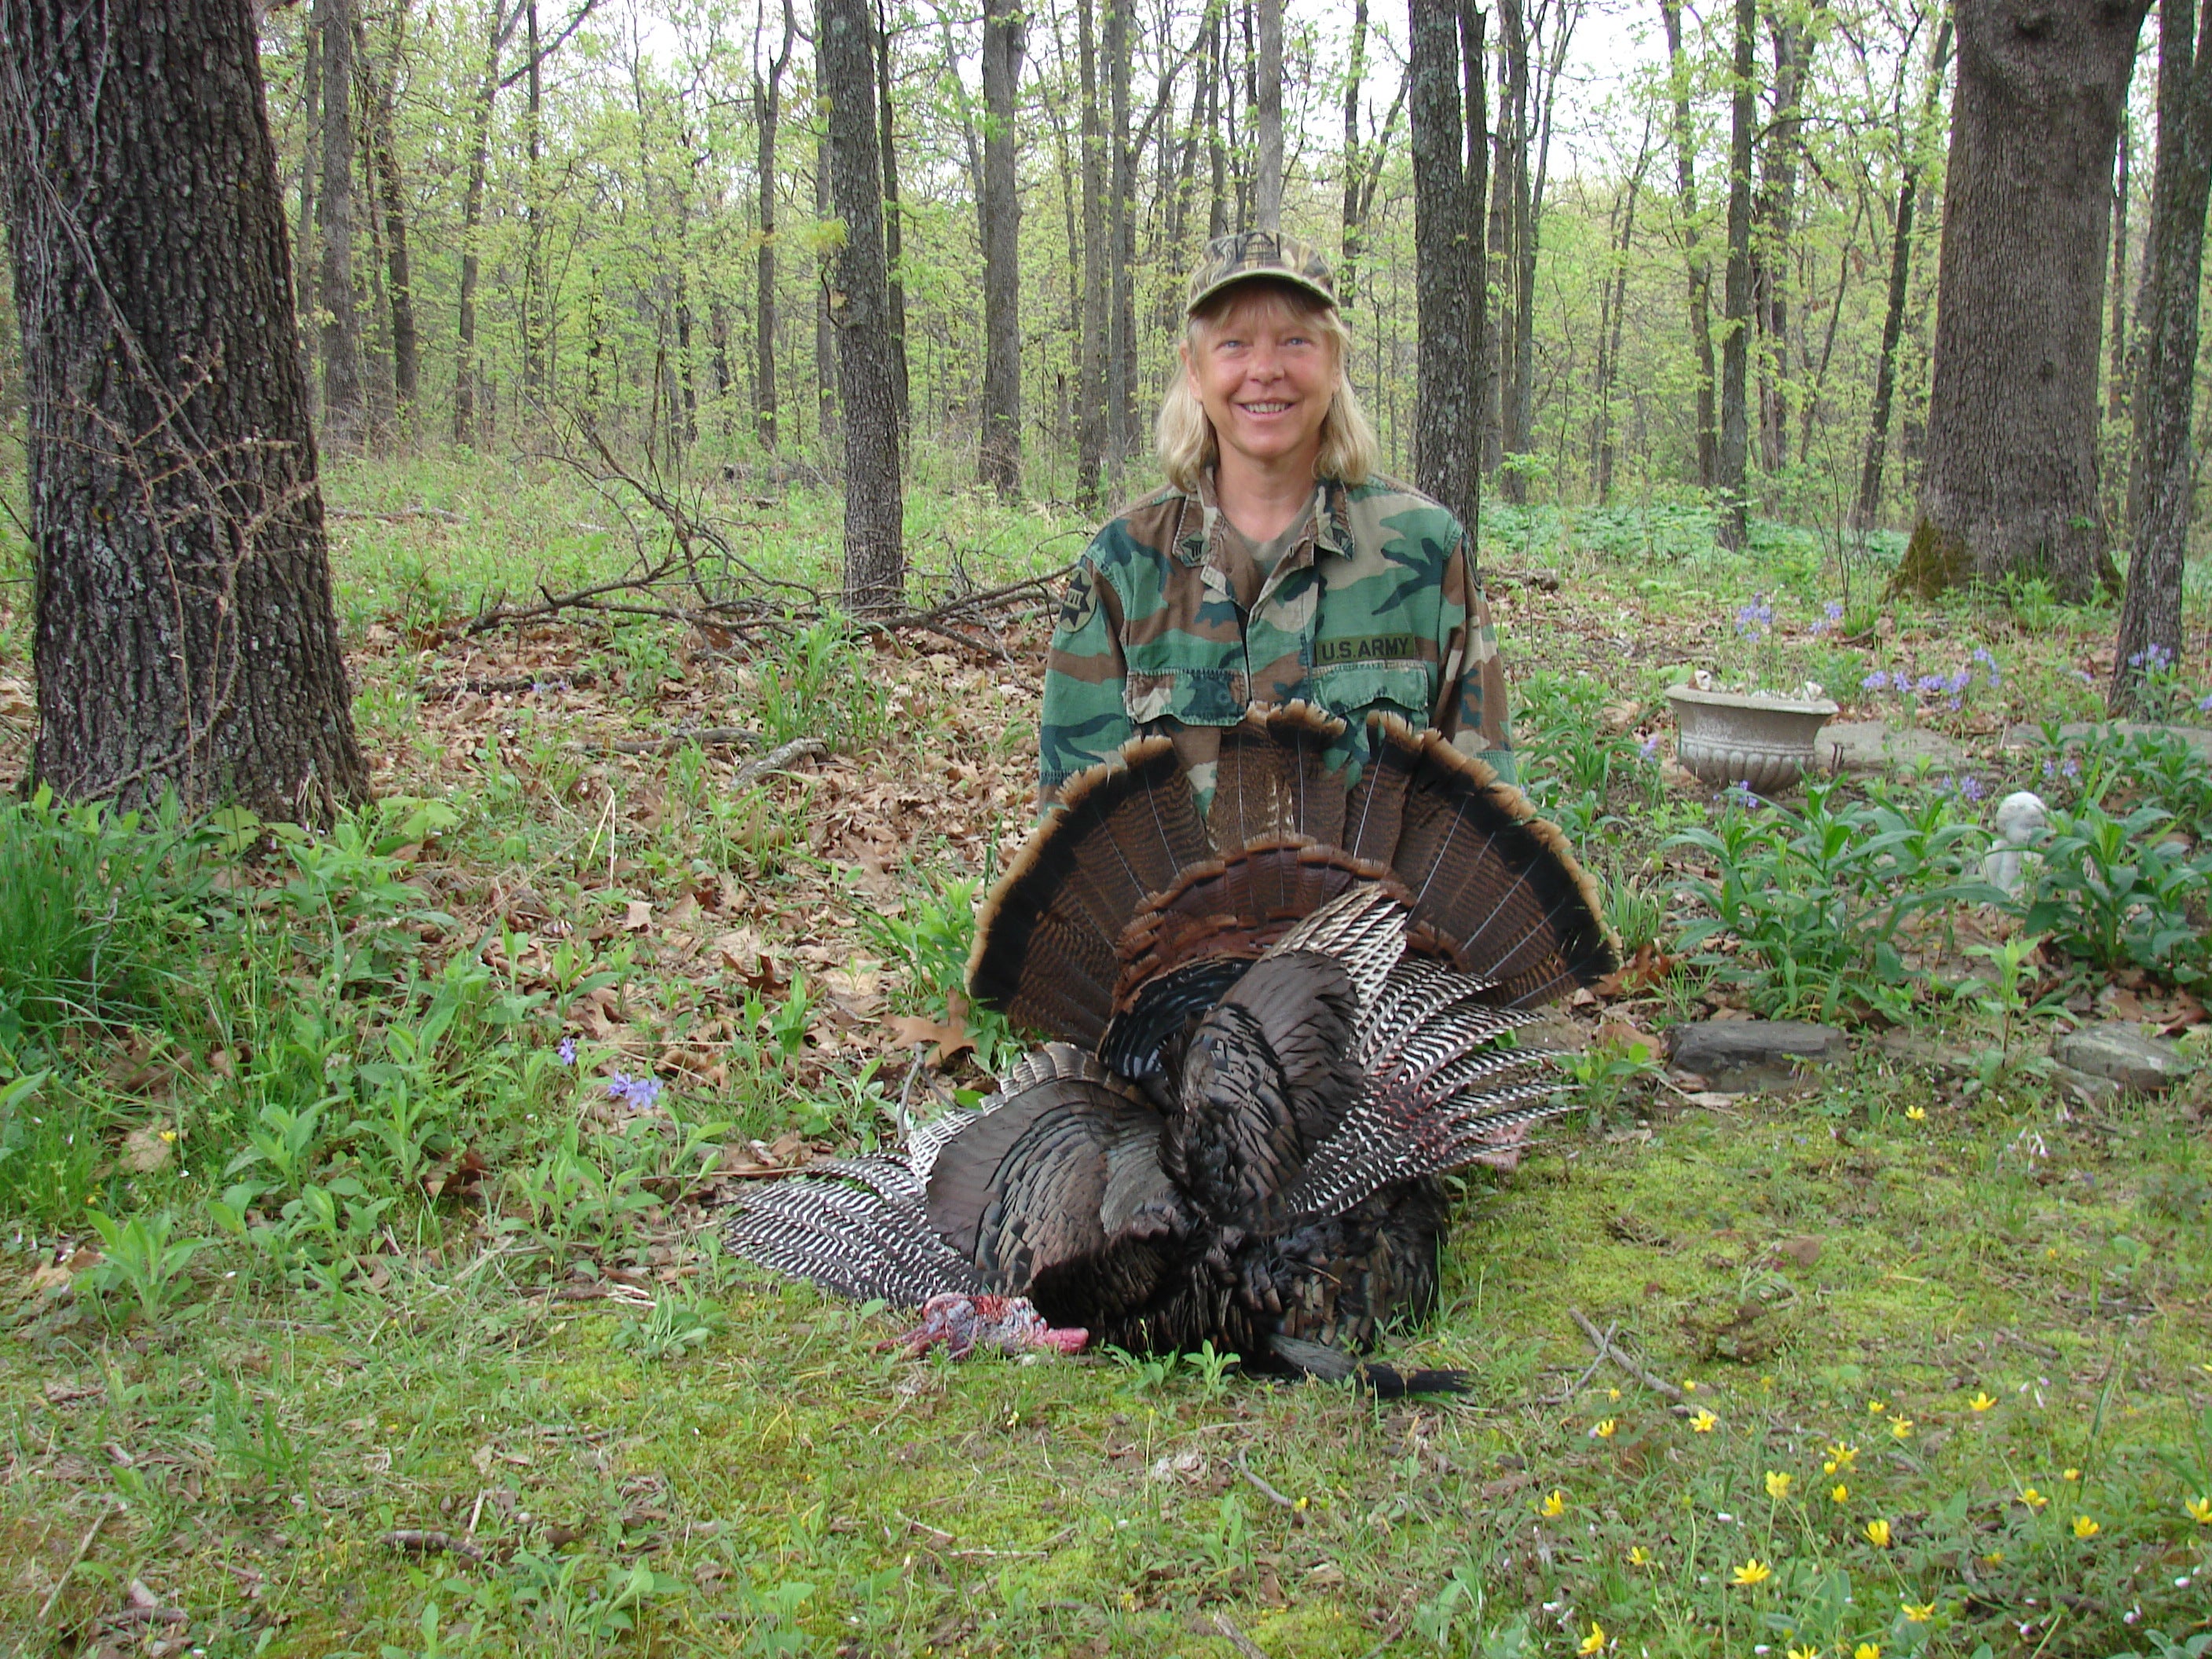 2014 spring turkey hunting outlook good for much of Missouri Missouri